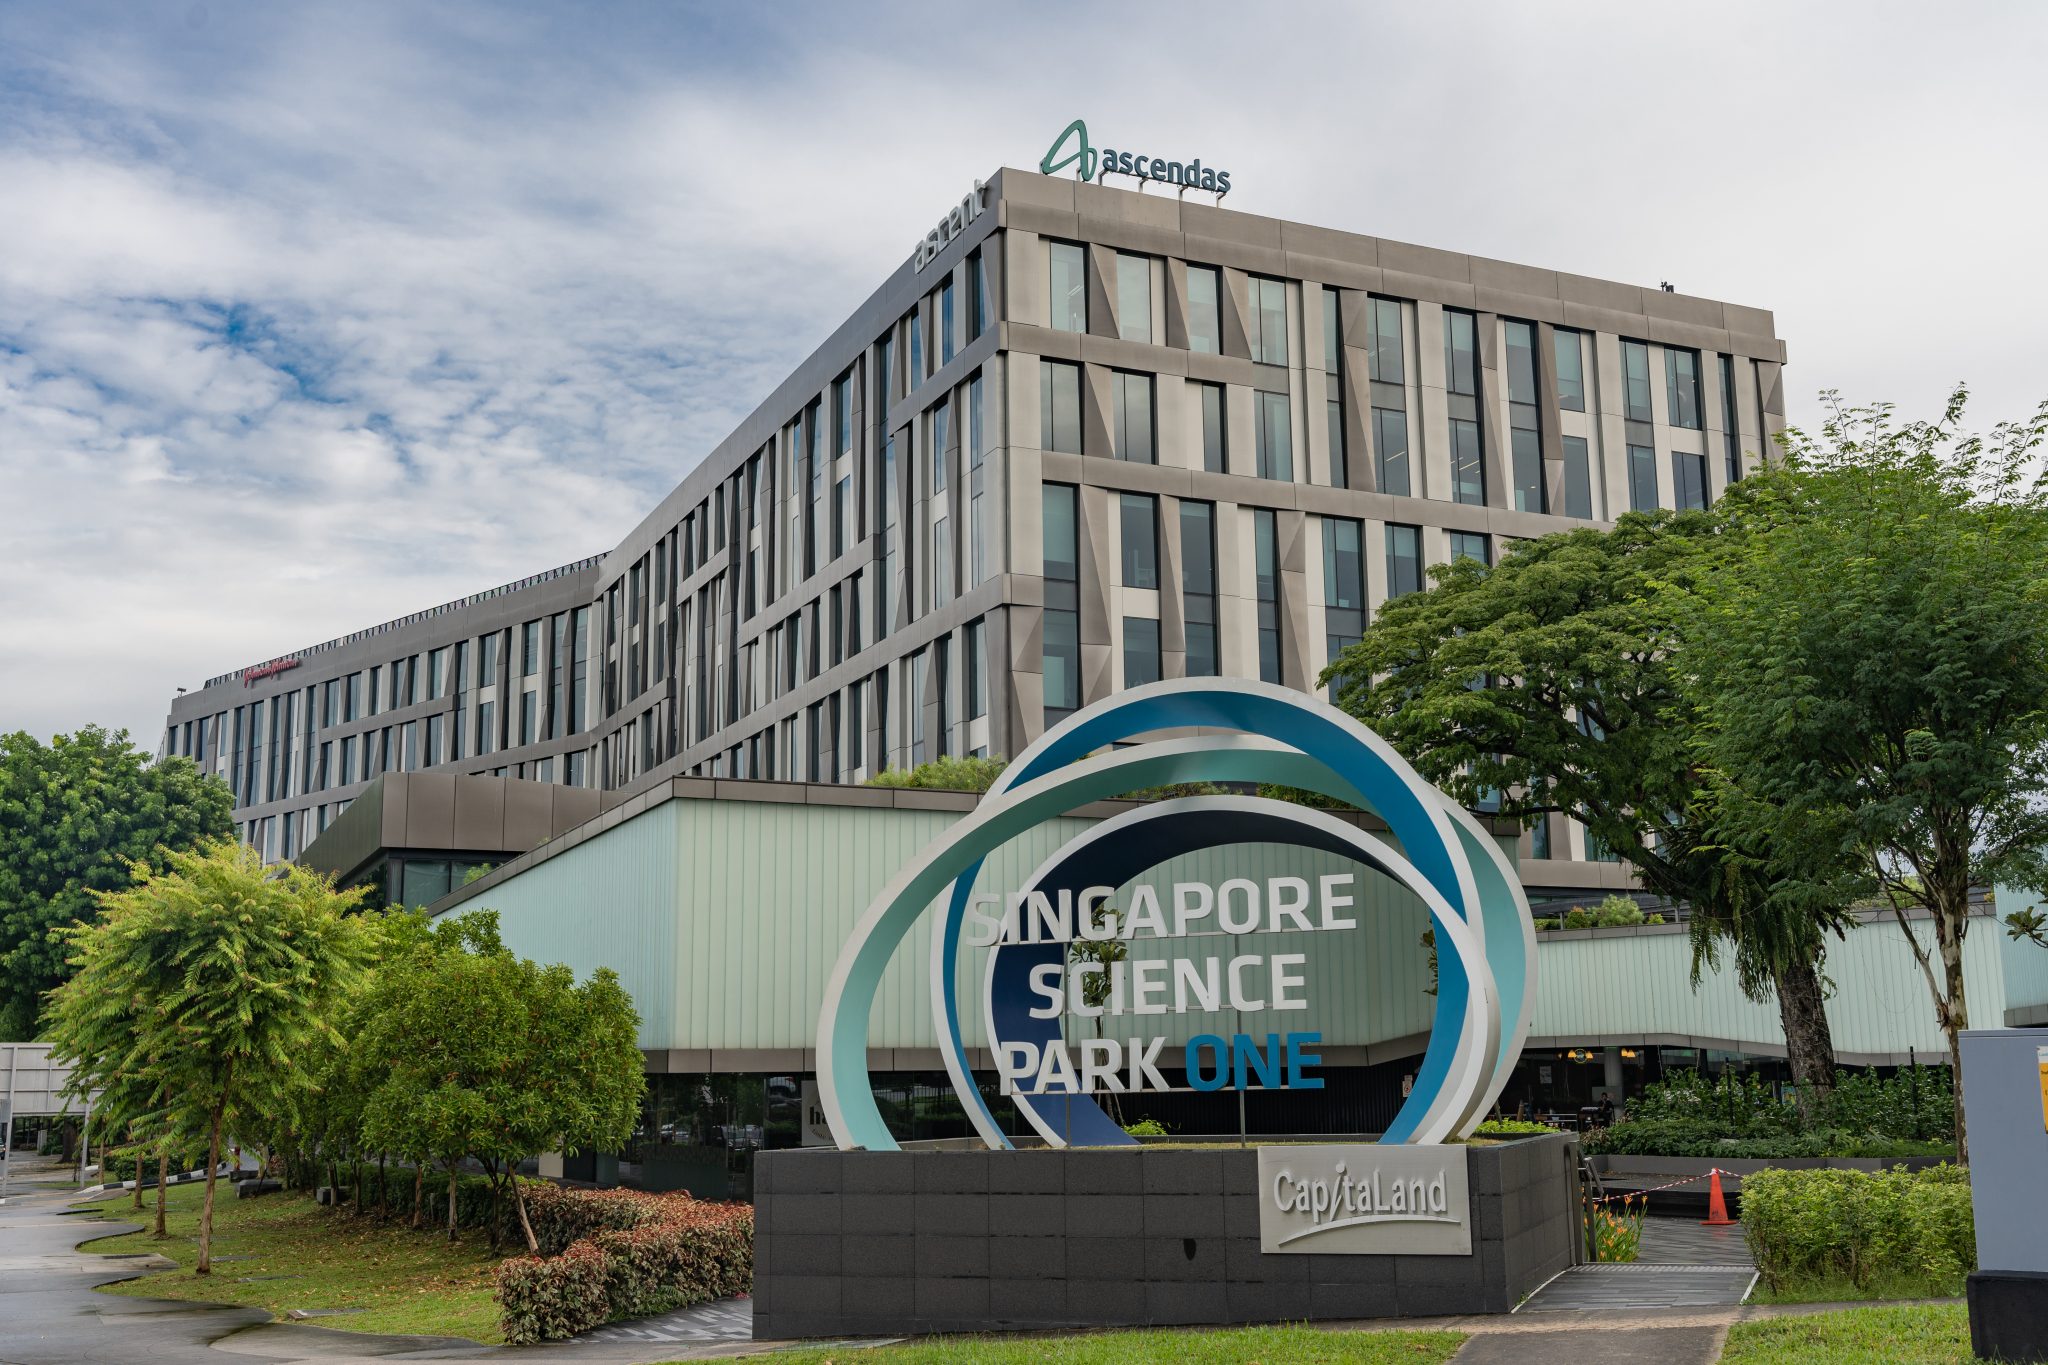 Just How Scientific is Singapore Science Park? A Not-So-Scientific Investigation